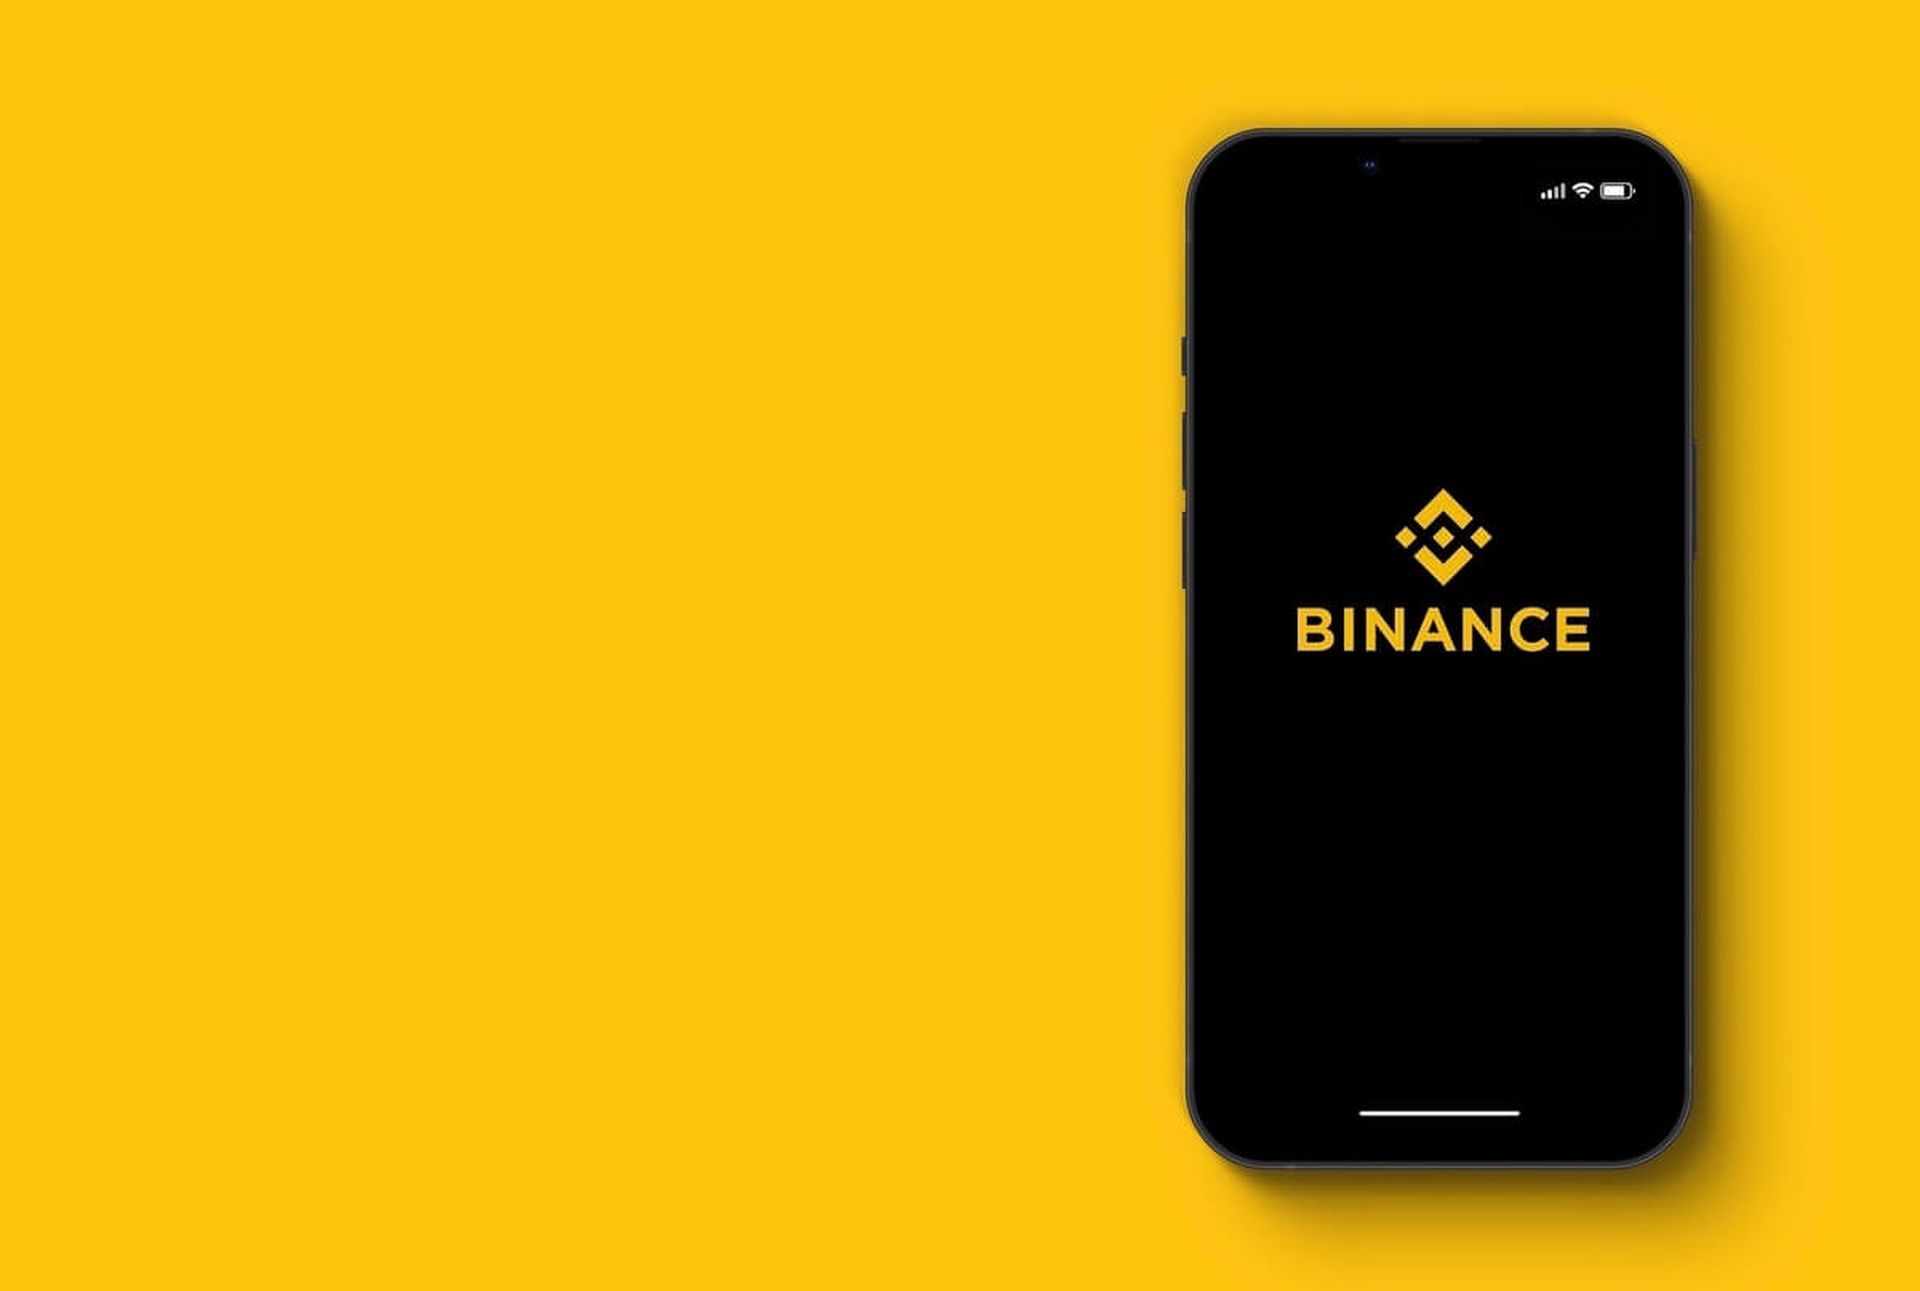 Today, we are here to show you the Binance Crypto WODL answers (September 19). If you find the correct cryptocurrency term in the Binance news, you might win...